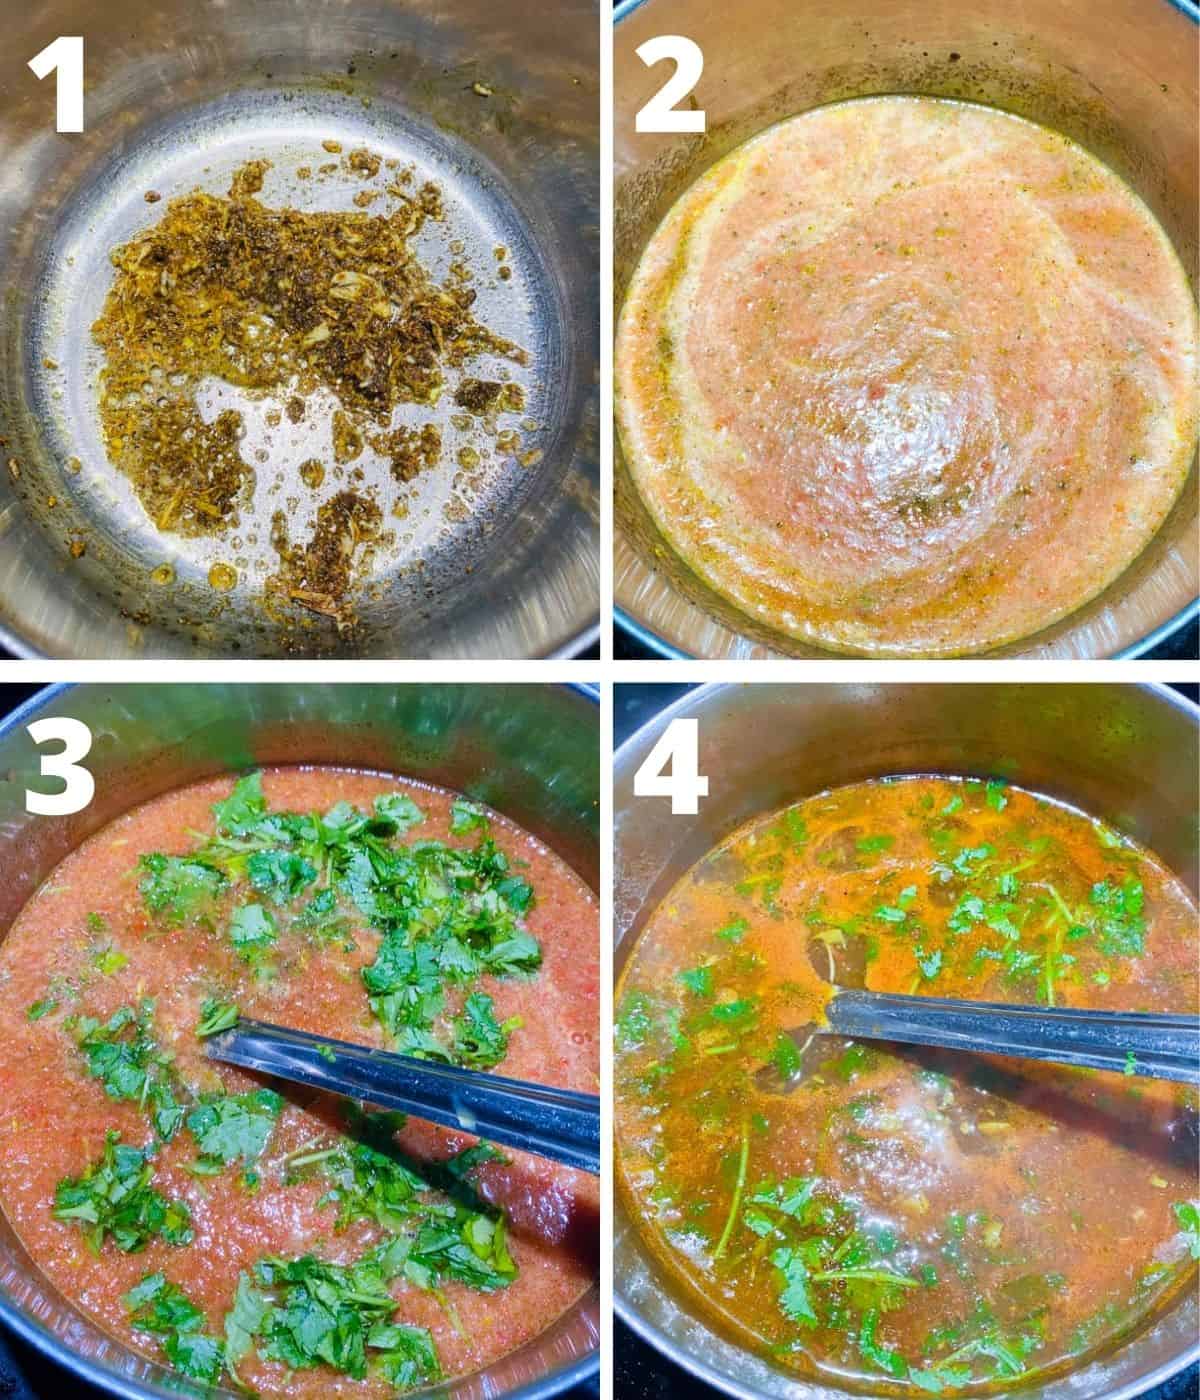 This is a collage image of 4 pictures showing the step by step process of making Tomato Miriyala Rasam in a steel pot